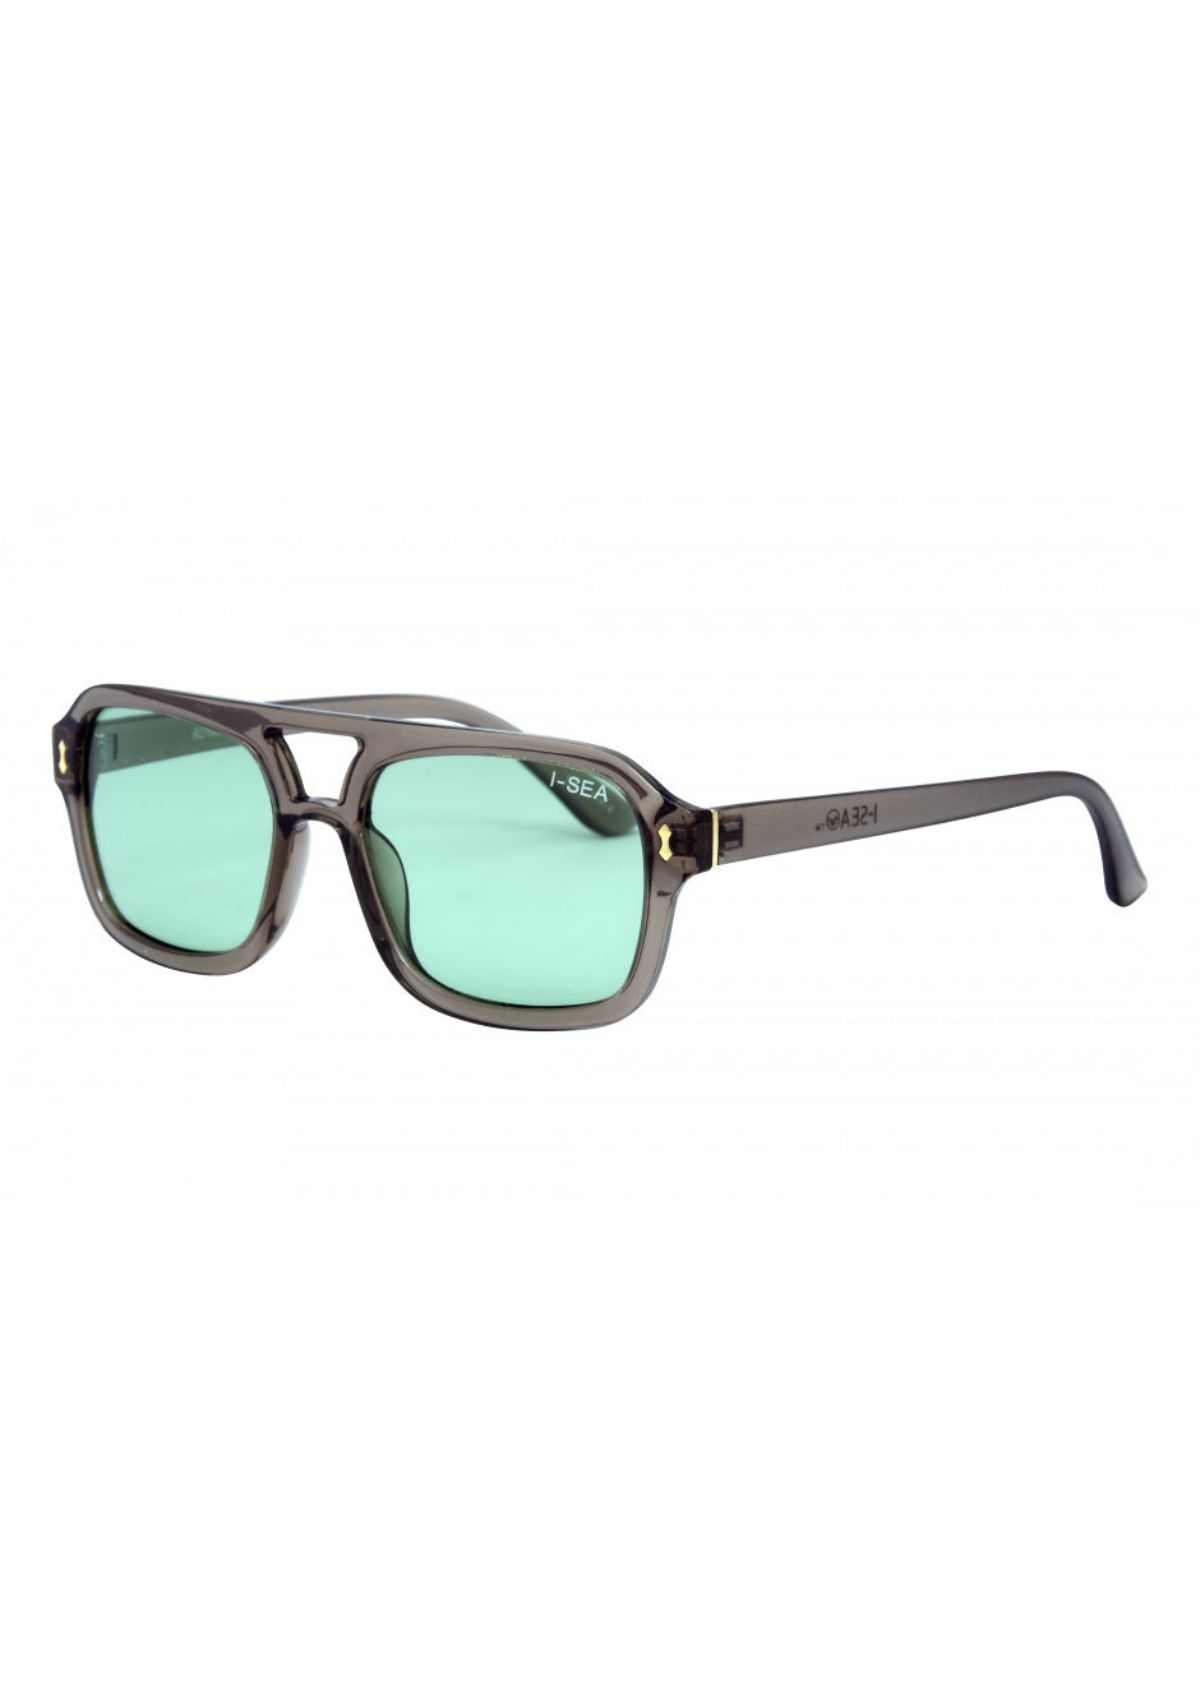 Thick square aviators. Grey frame with green lens.